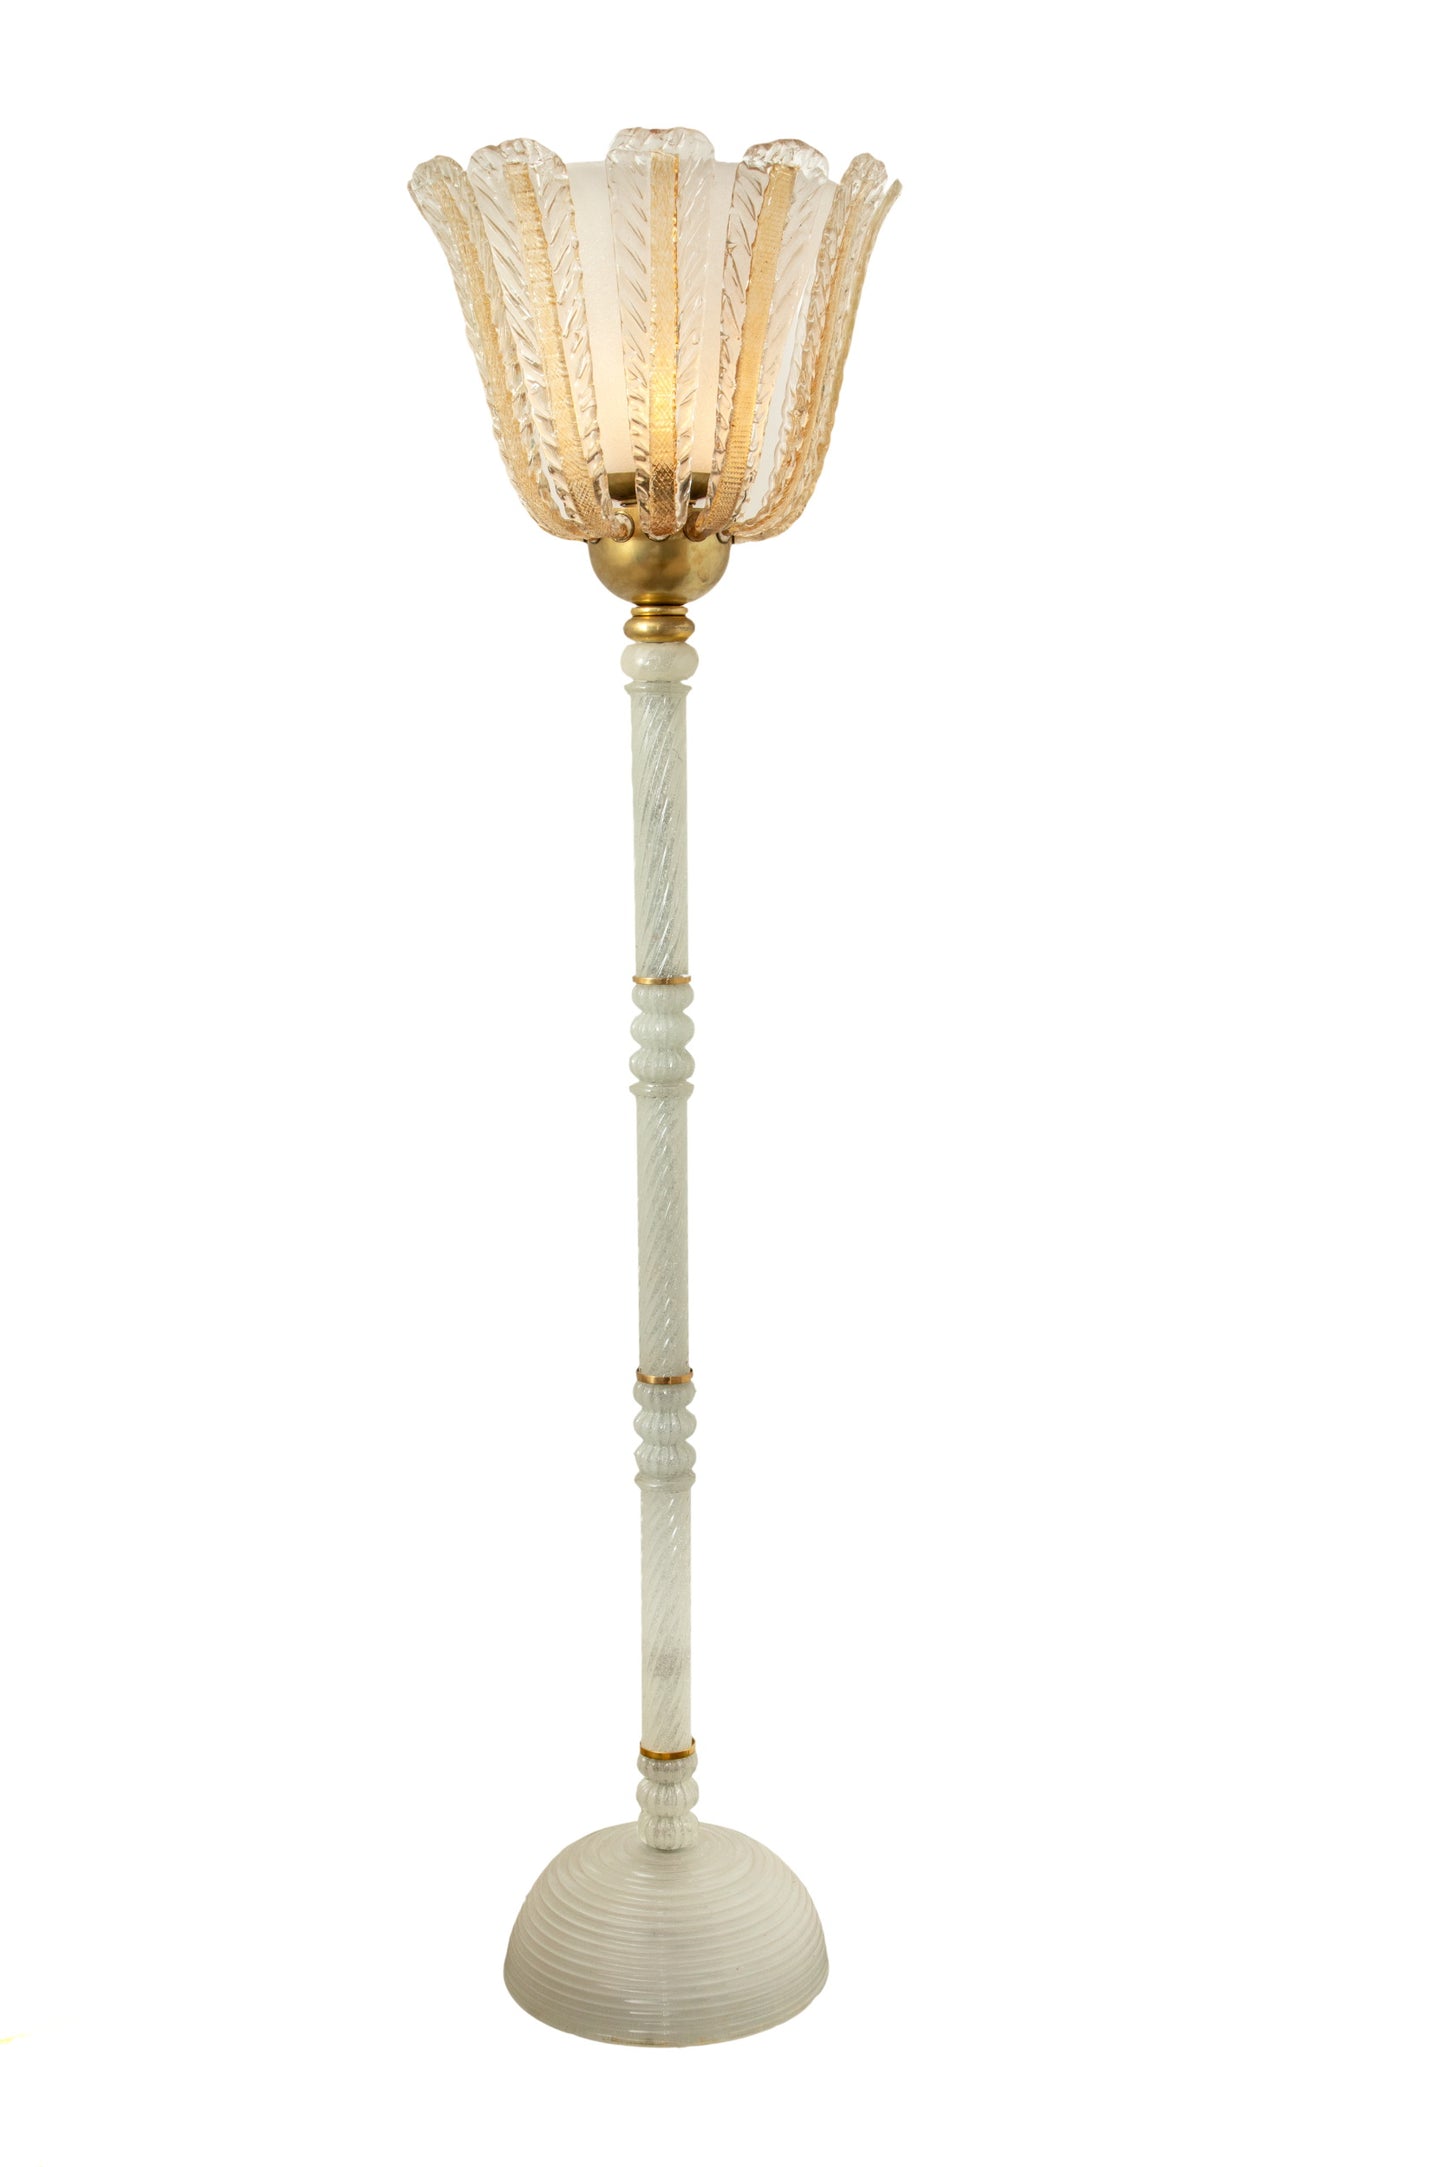 Ercole Barovier floor lamp from the 1940s